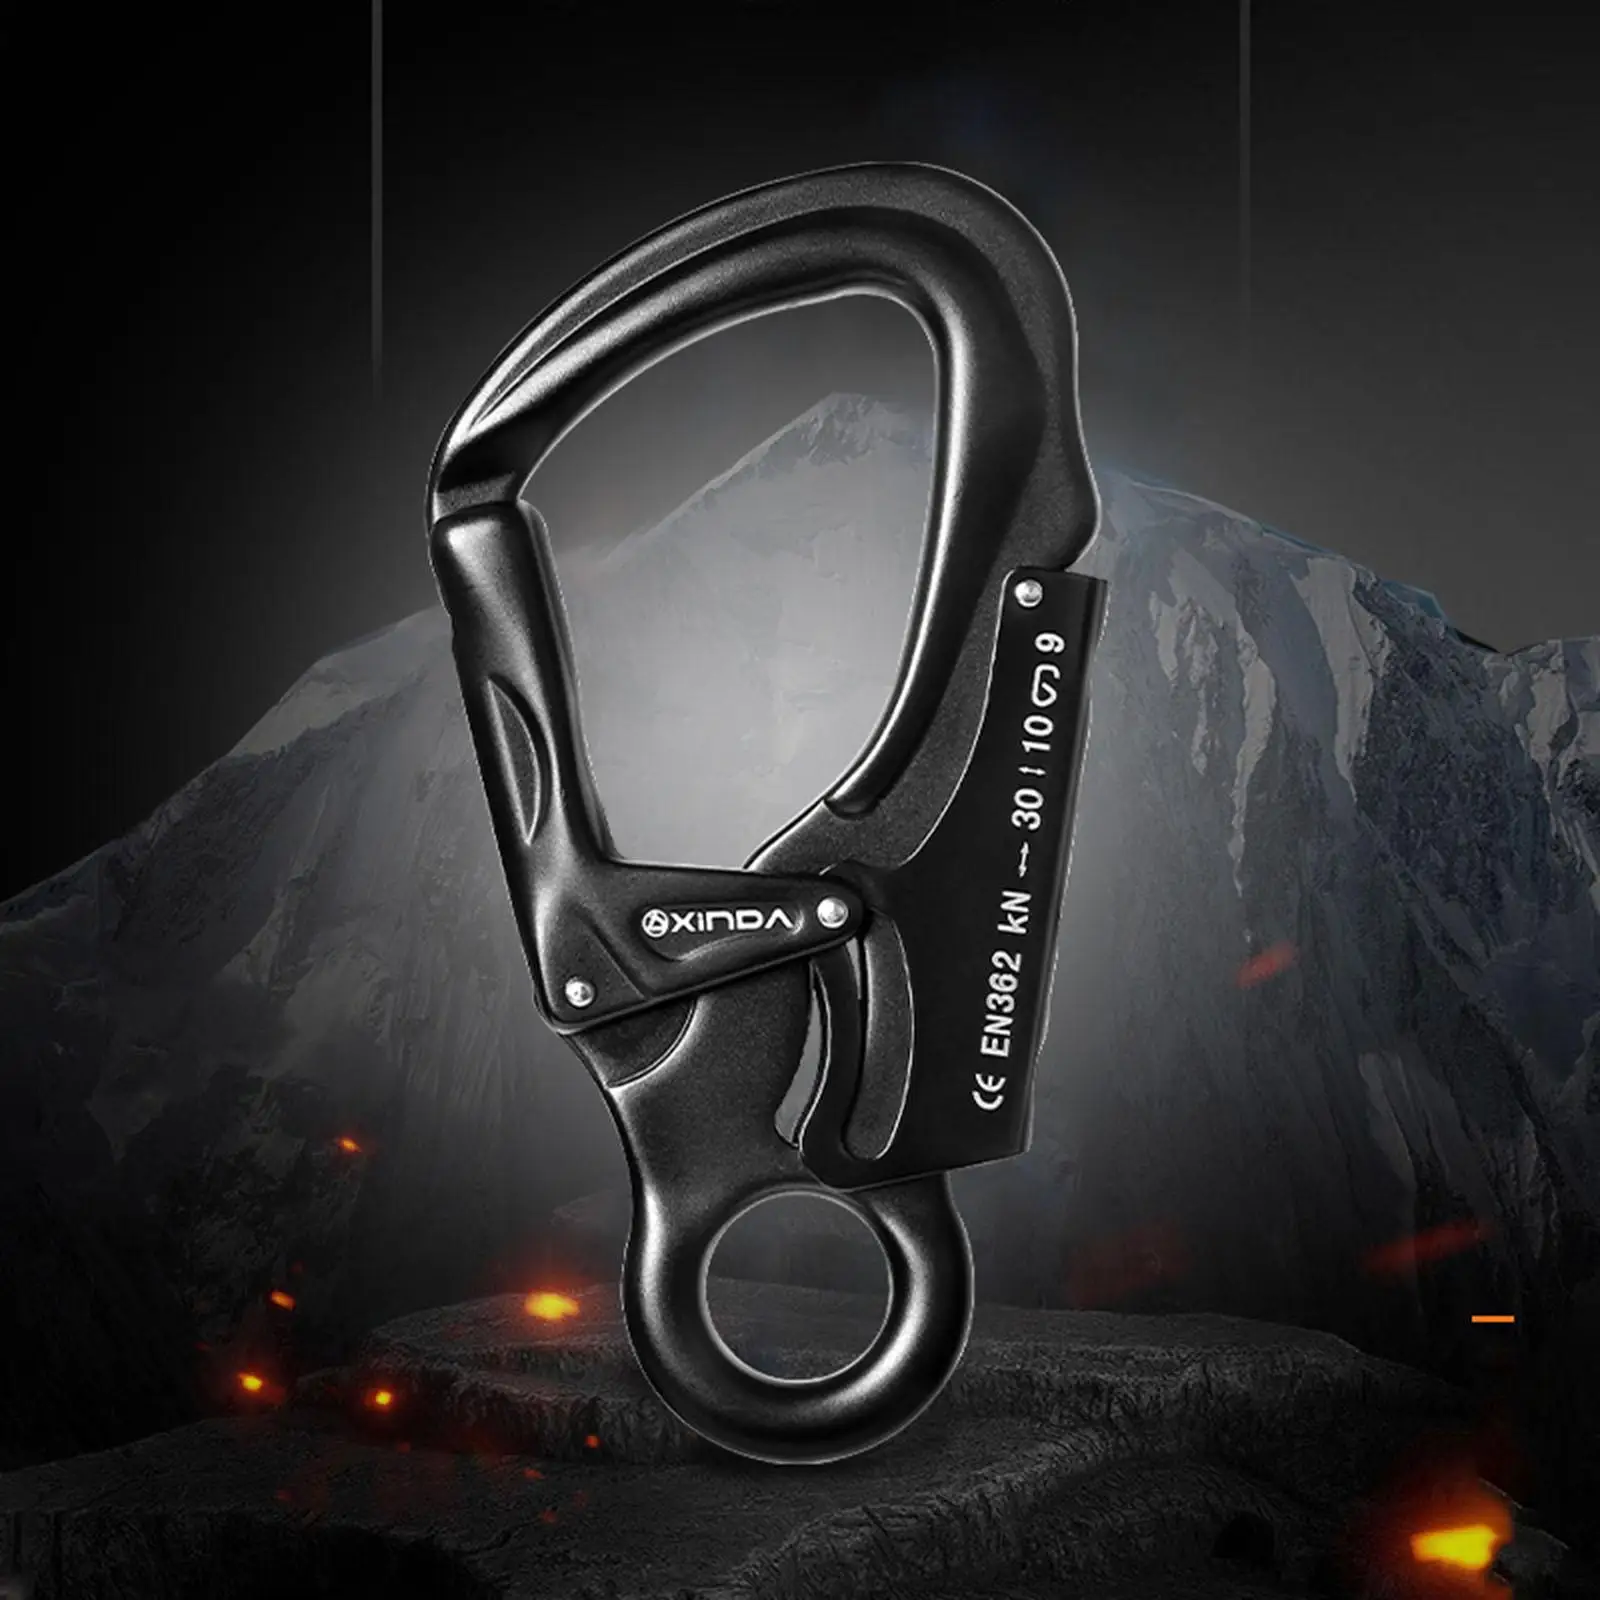 Auto Locking Carabiner Keychain Aluminum Alloy for Outdoor Climbing Swing